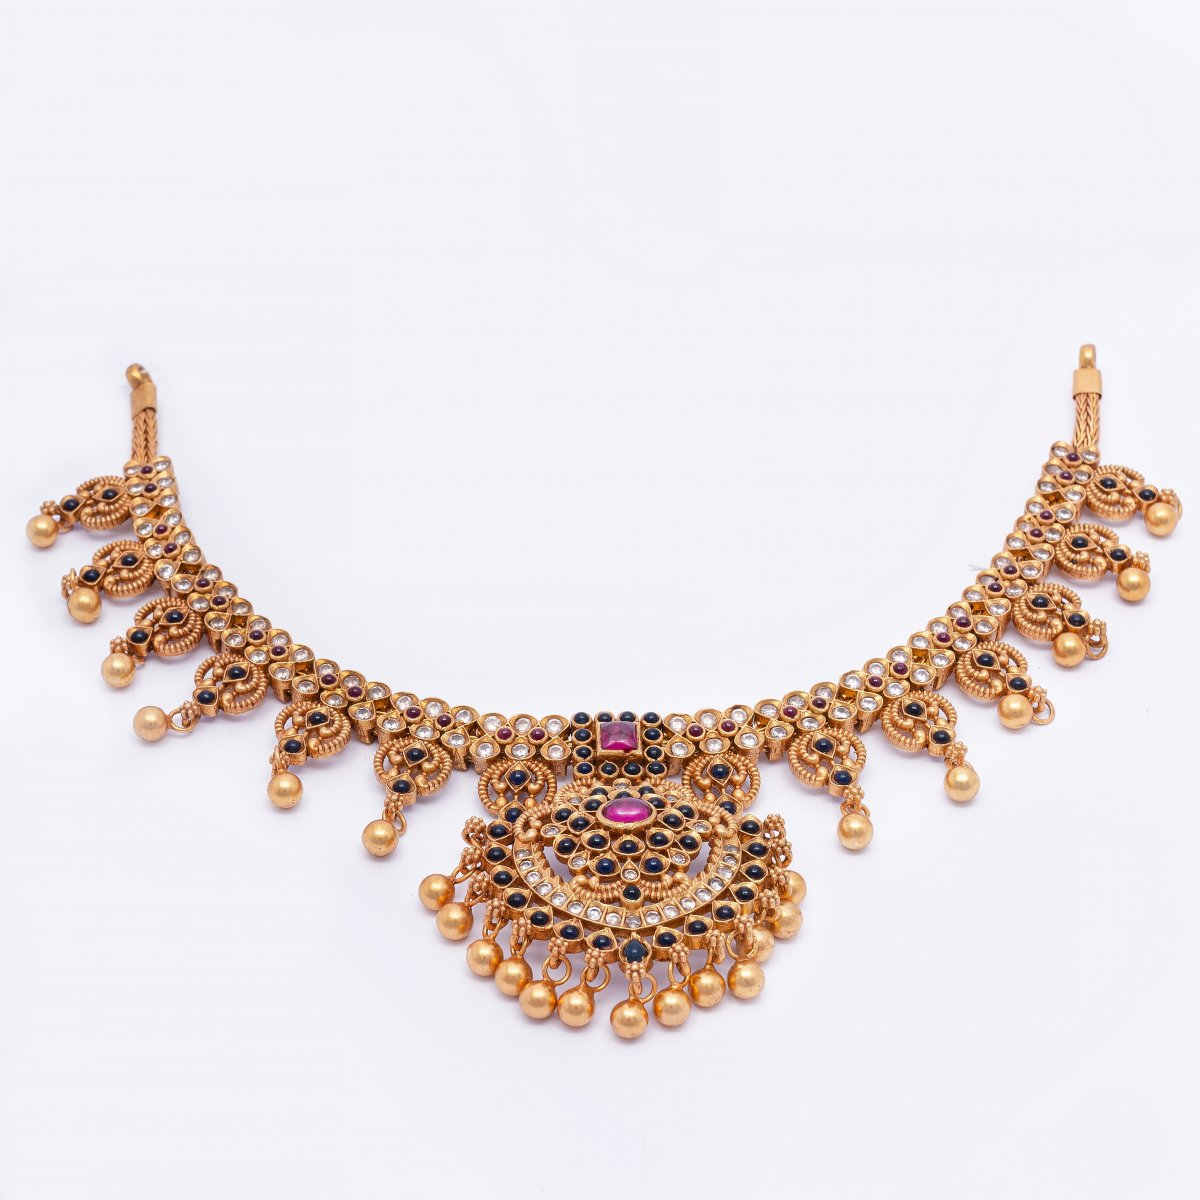 GOLD POLISHED TRADITIONAL PARTY SILVER NECKLACE FOR WOMEN